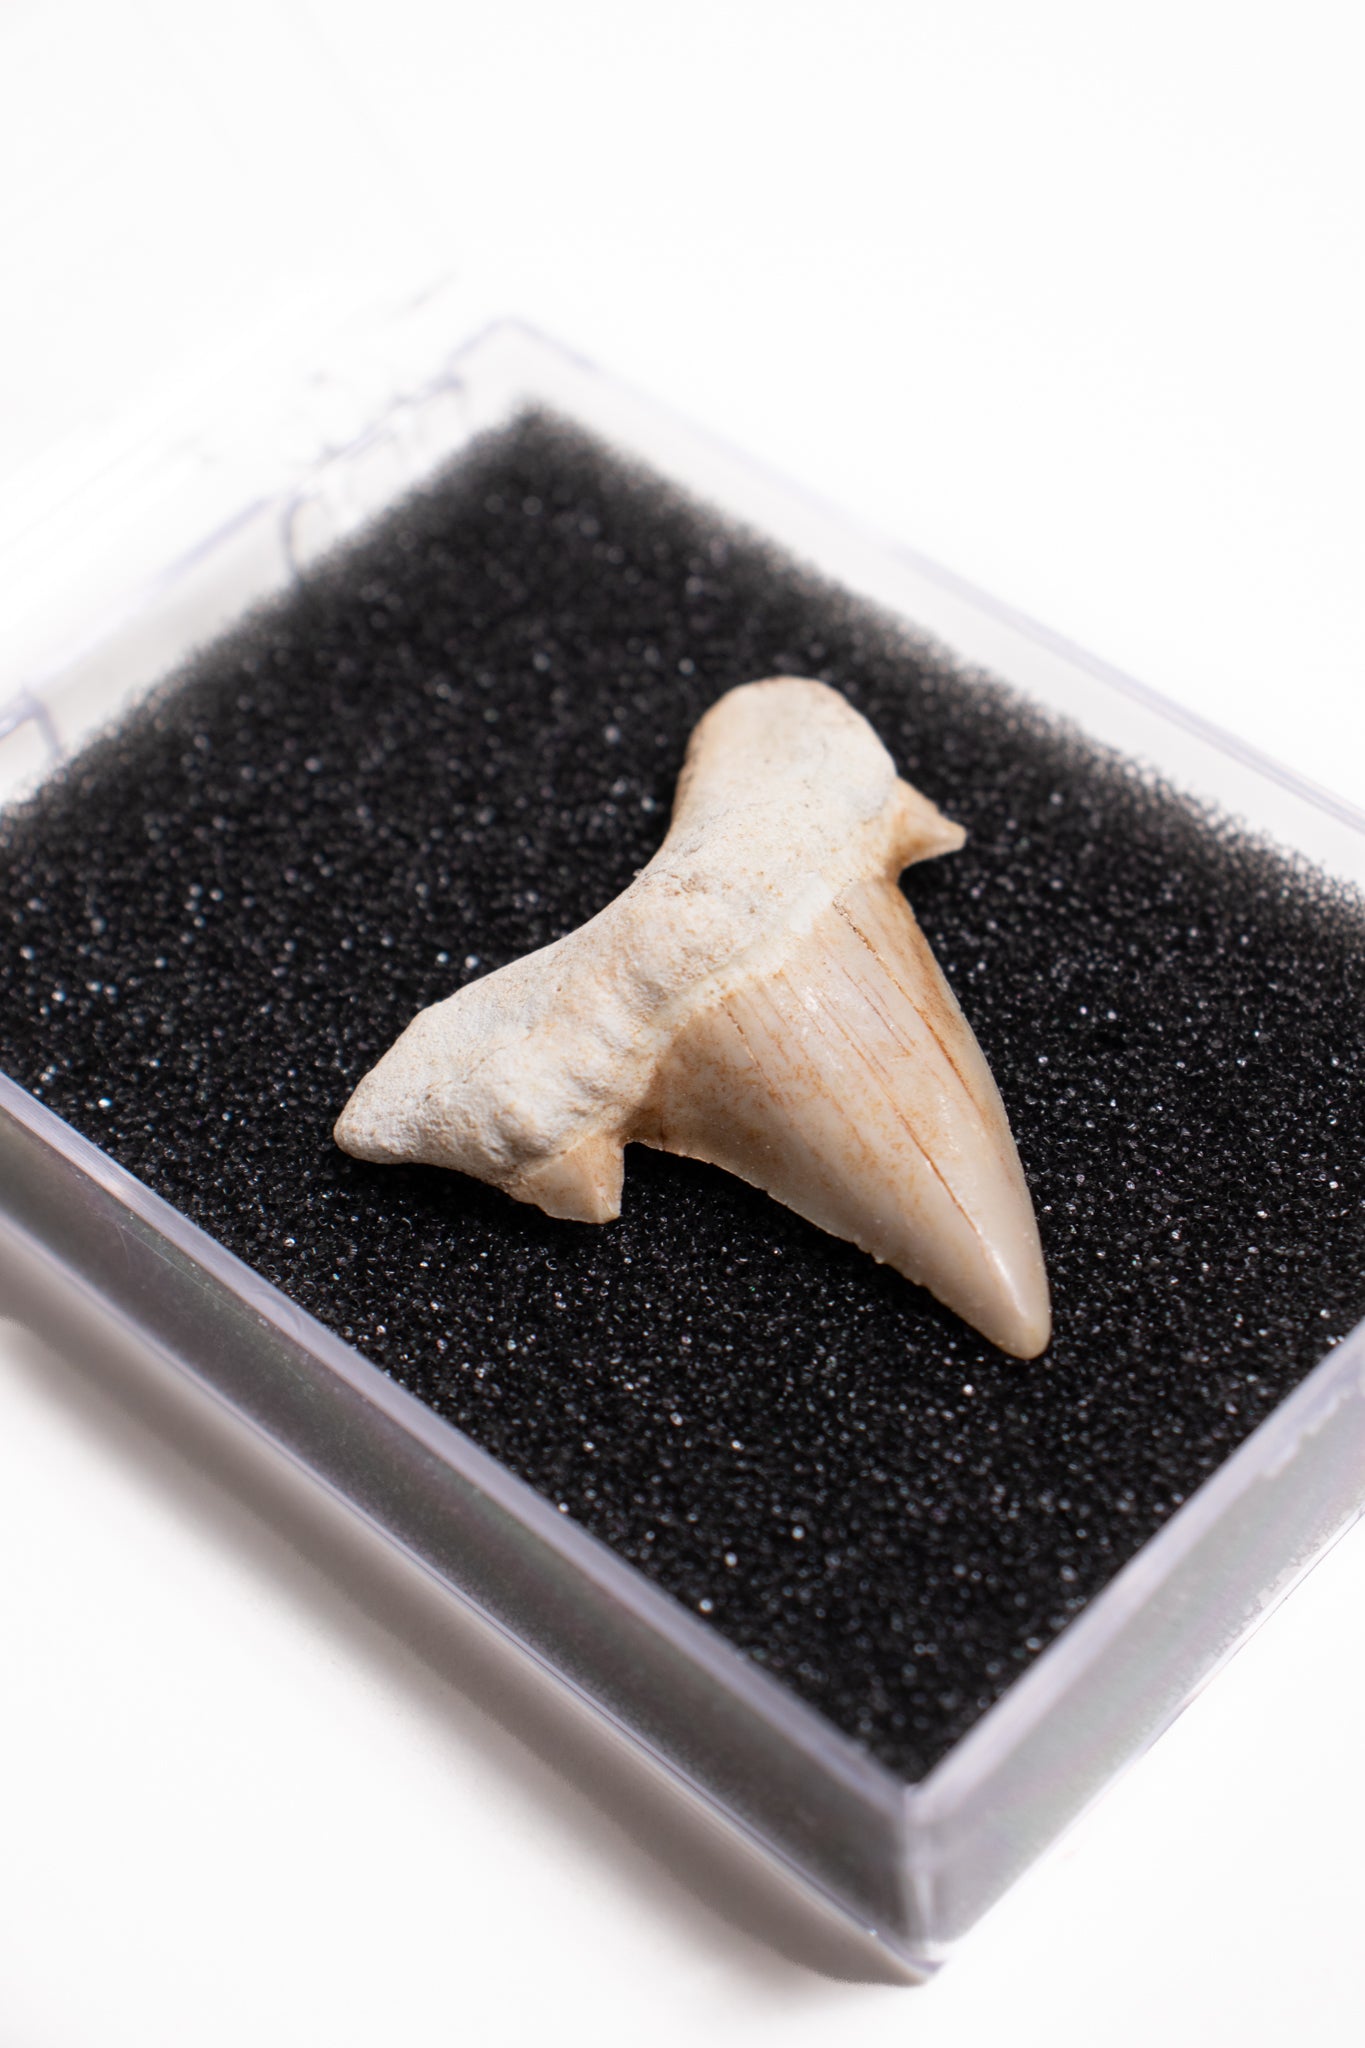 Otodus Tooth Fossil - Stemcell Science Shop